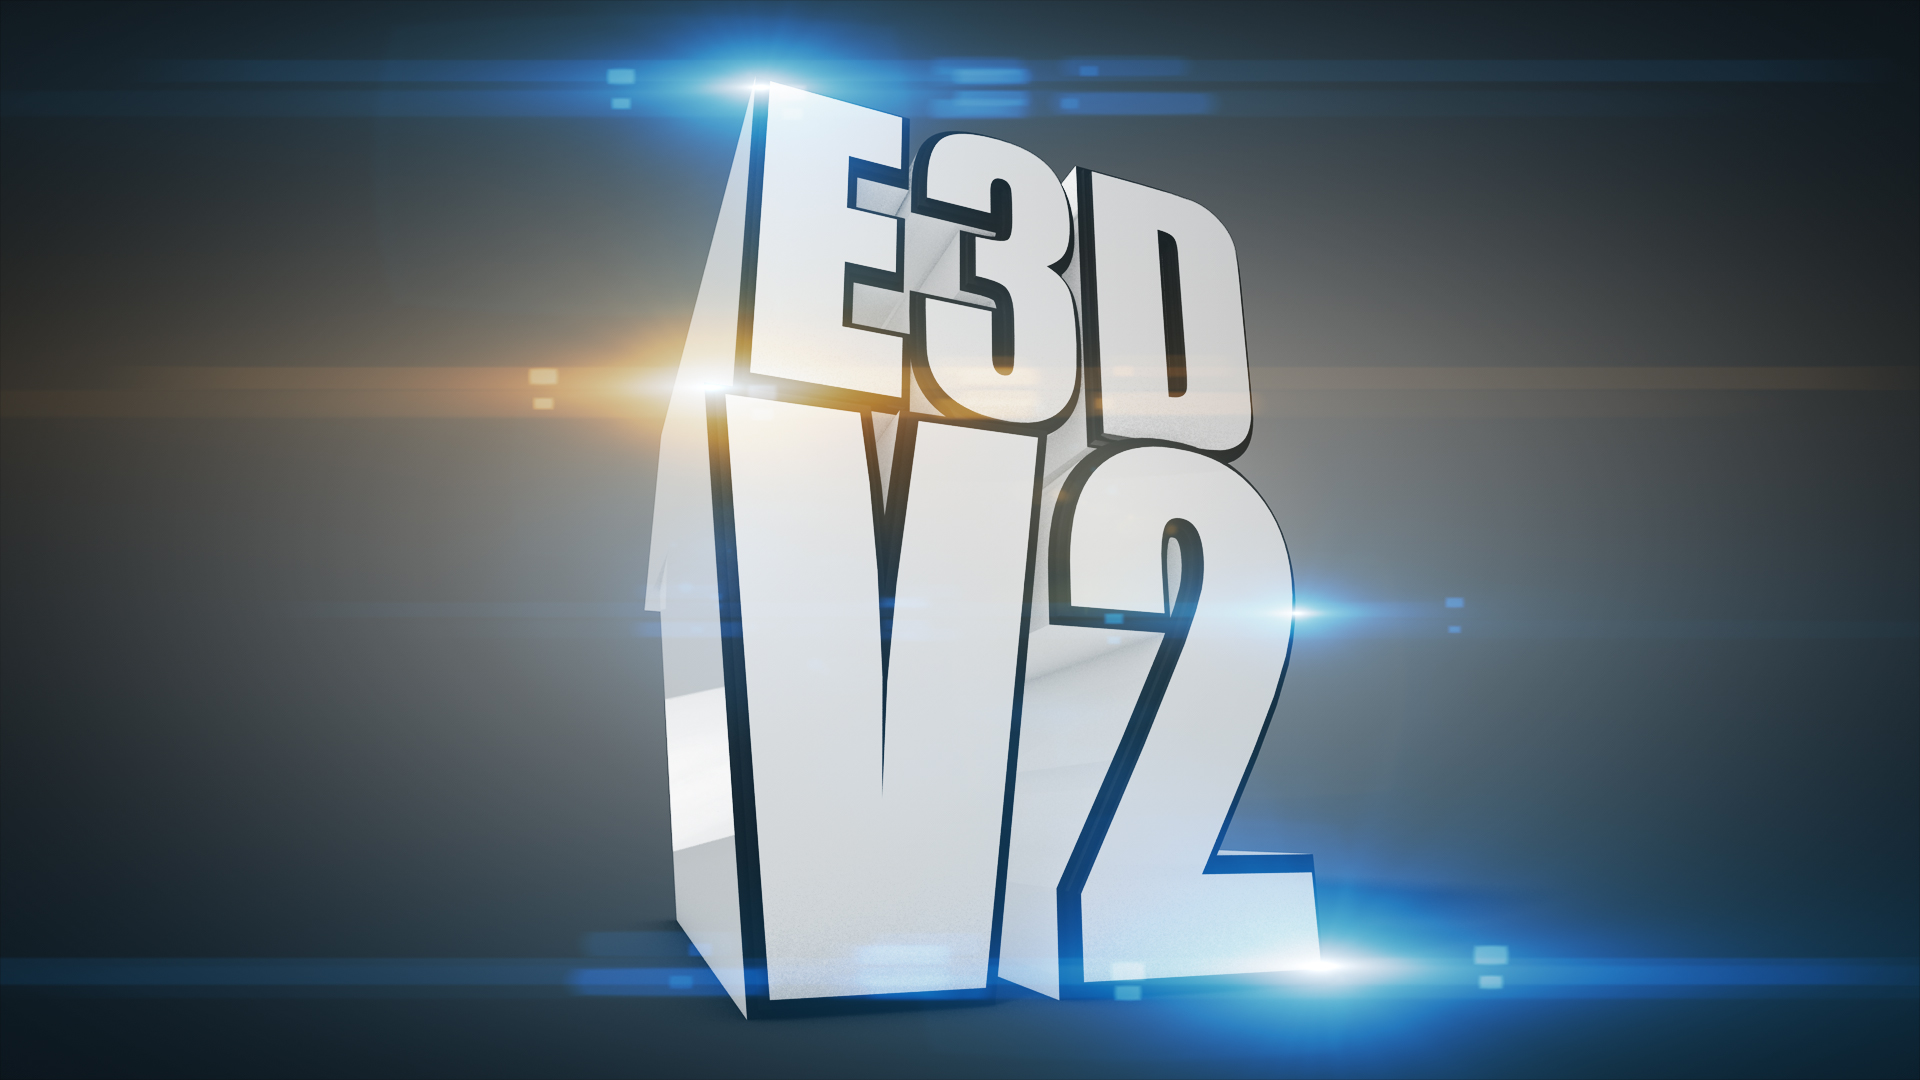  Tips and Tricks on the Popular After Effects Plug-in  Element 3D   Start Learning  